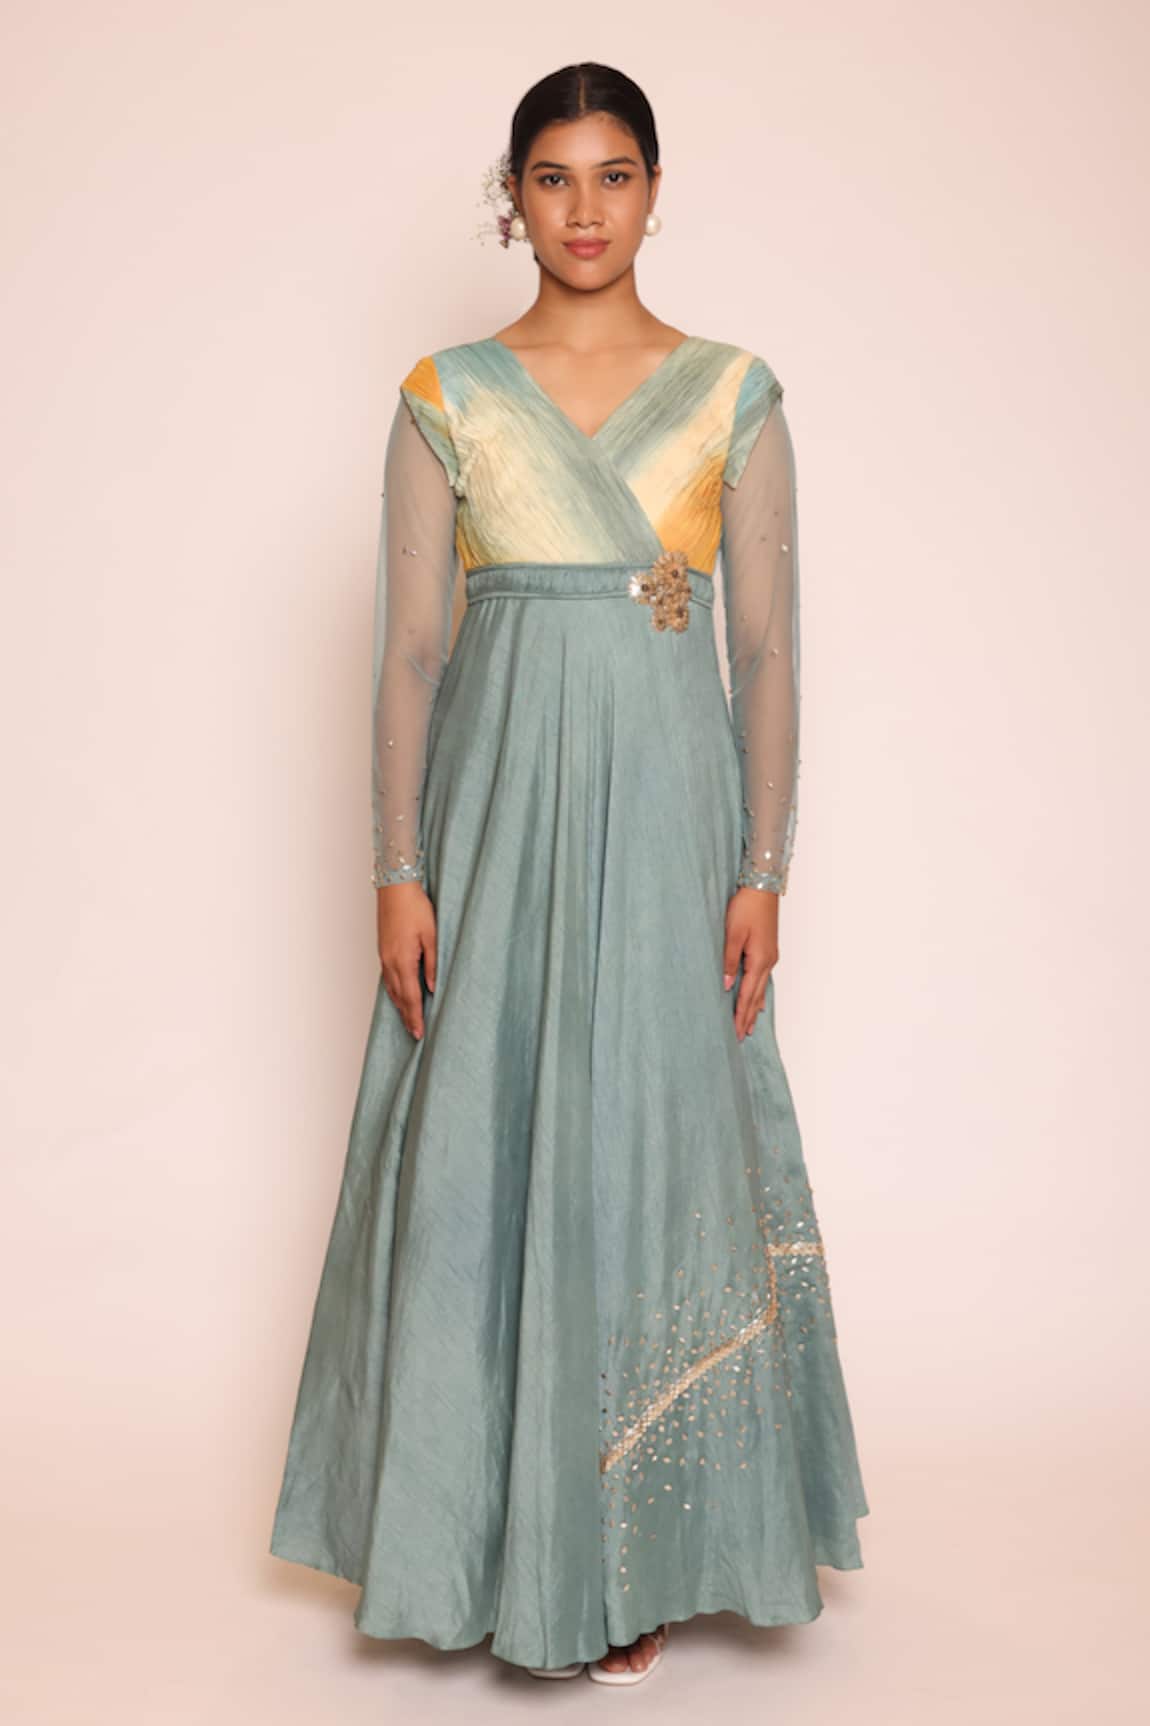 ABSTRACT BY MEGHA JAIN MADAAN Ombre Gathered Bodice Embellished Maxi Dress